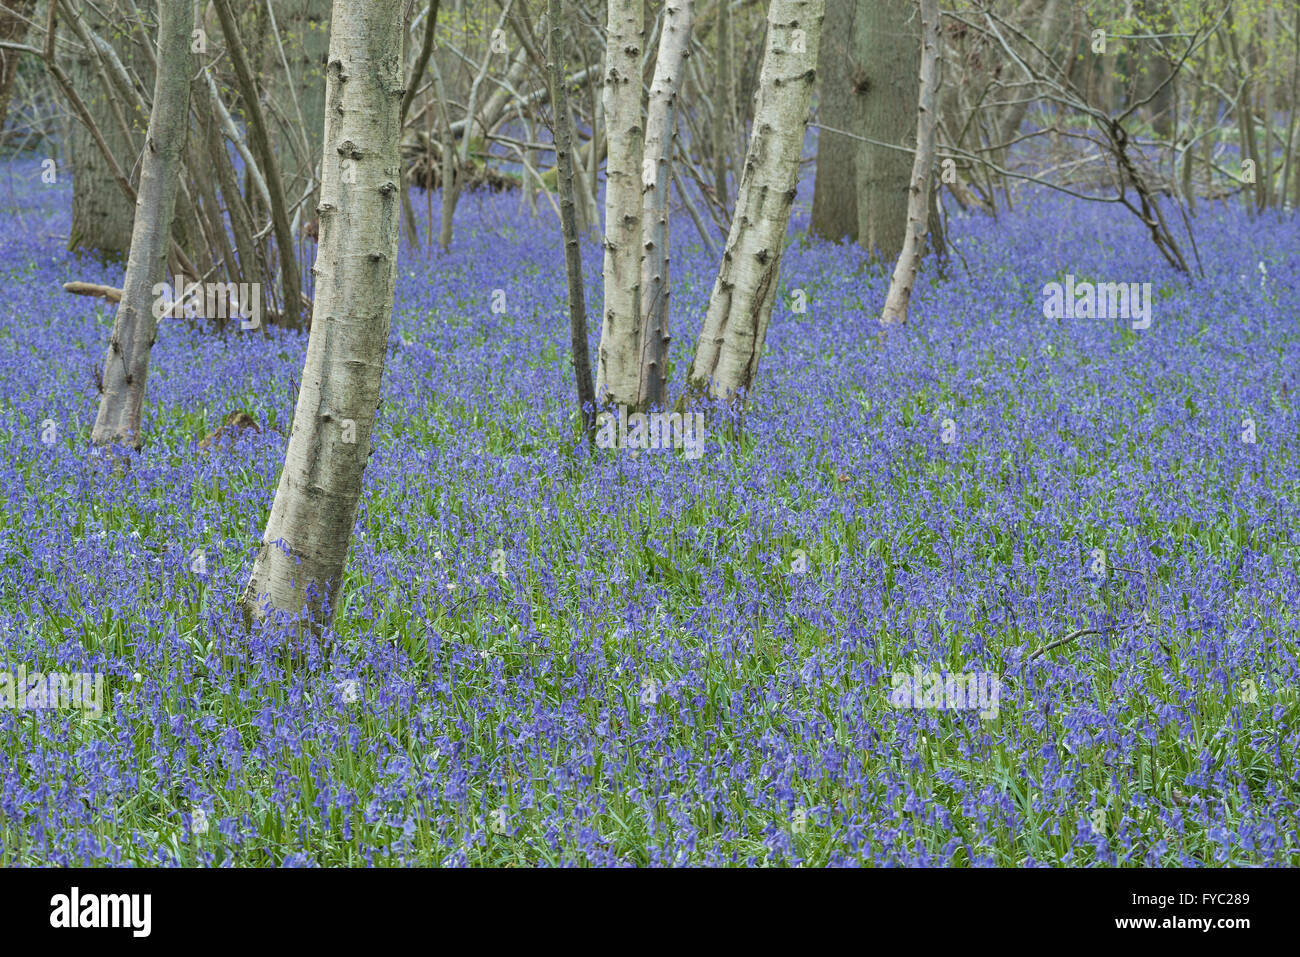 lots of bluebells in an ancient beech oak and silver birch woodland covering the floor ground beneath tree canopy Stock Photo